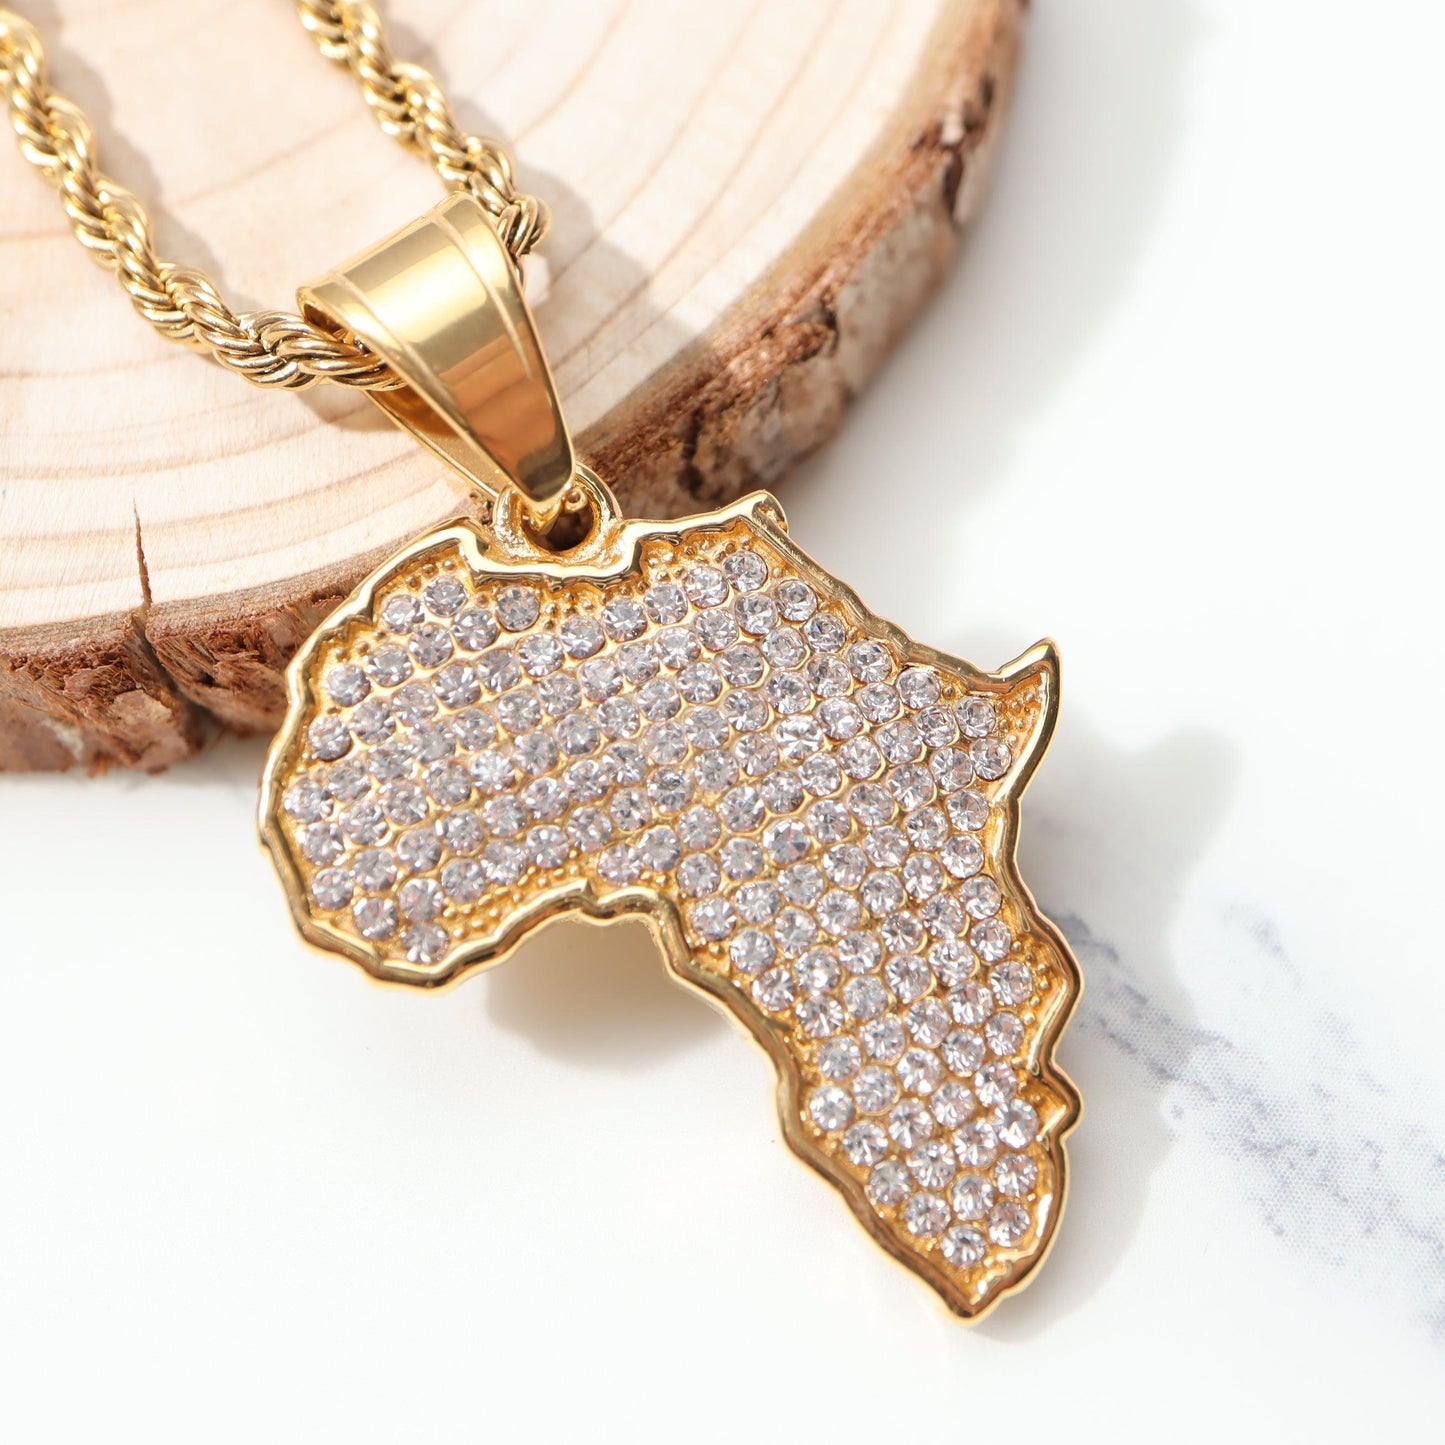 Africa Map Iced Out Chain Rhinestone Crystal Gold Pendant & Necklace Africa Map pendant necklace For Men/Women fashion Jewelry